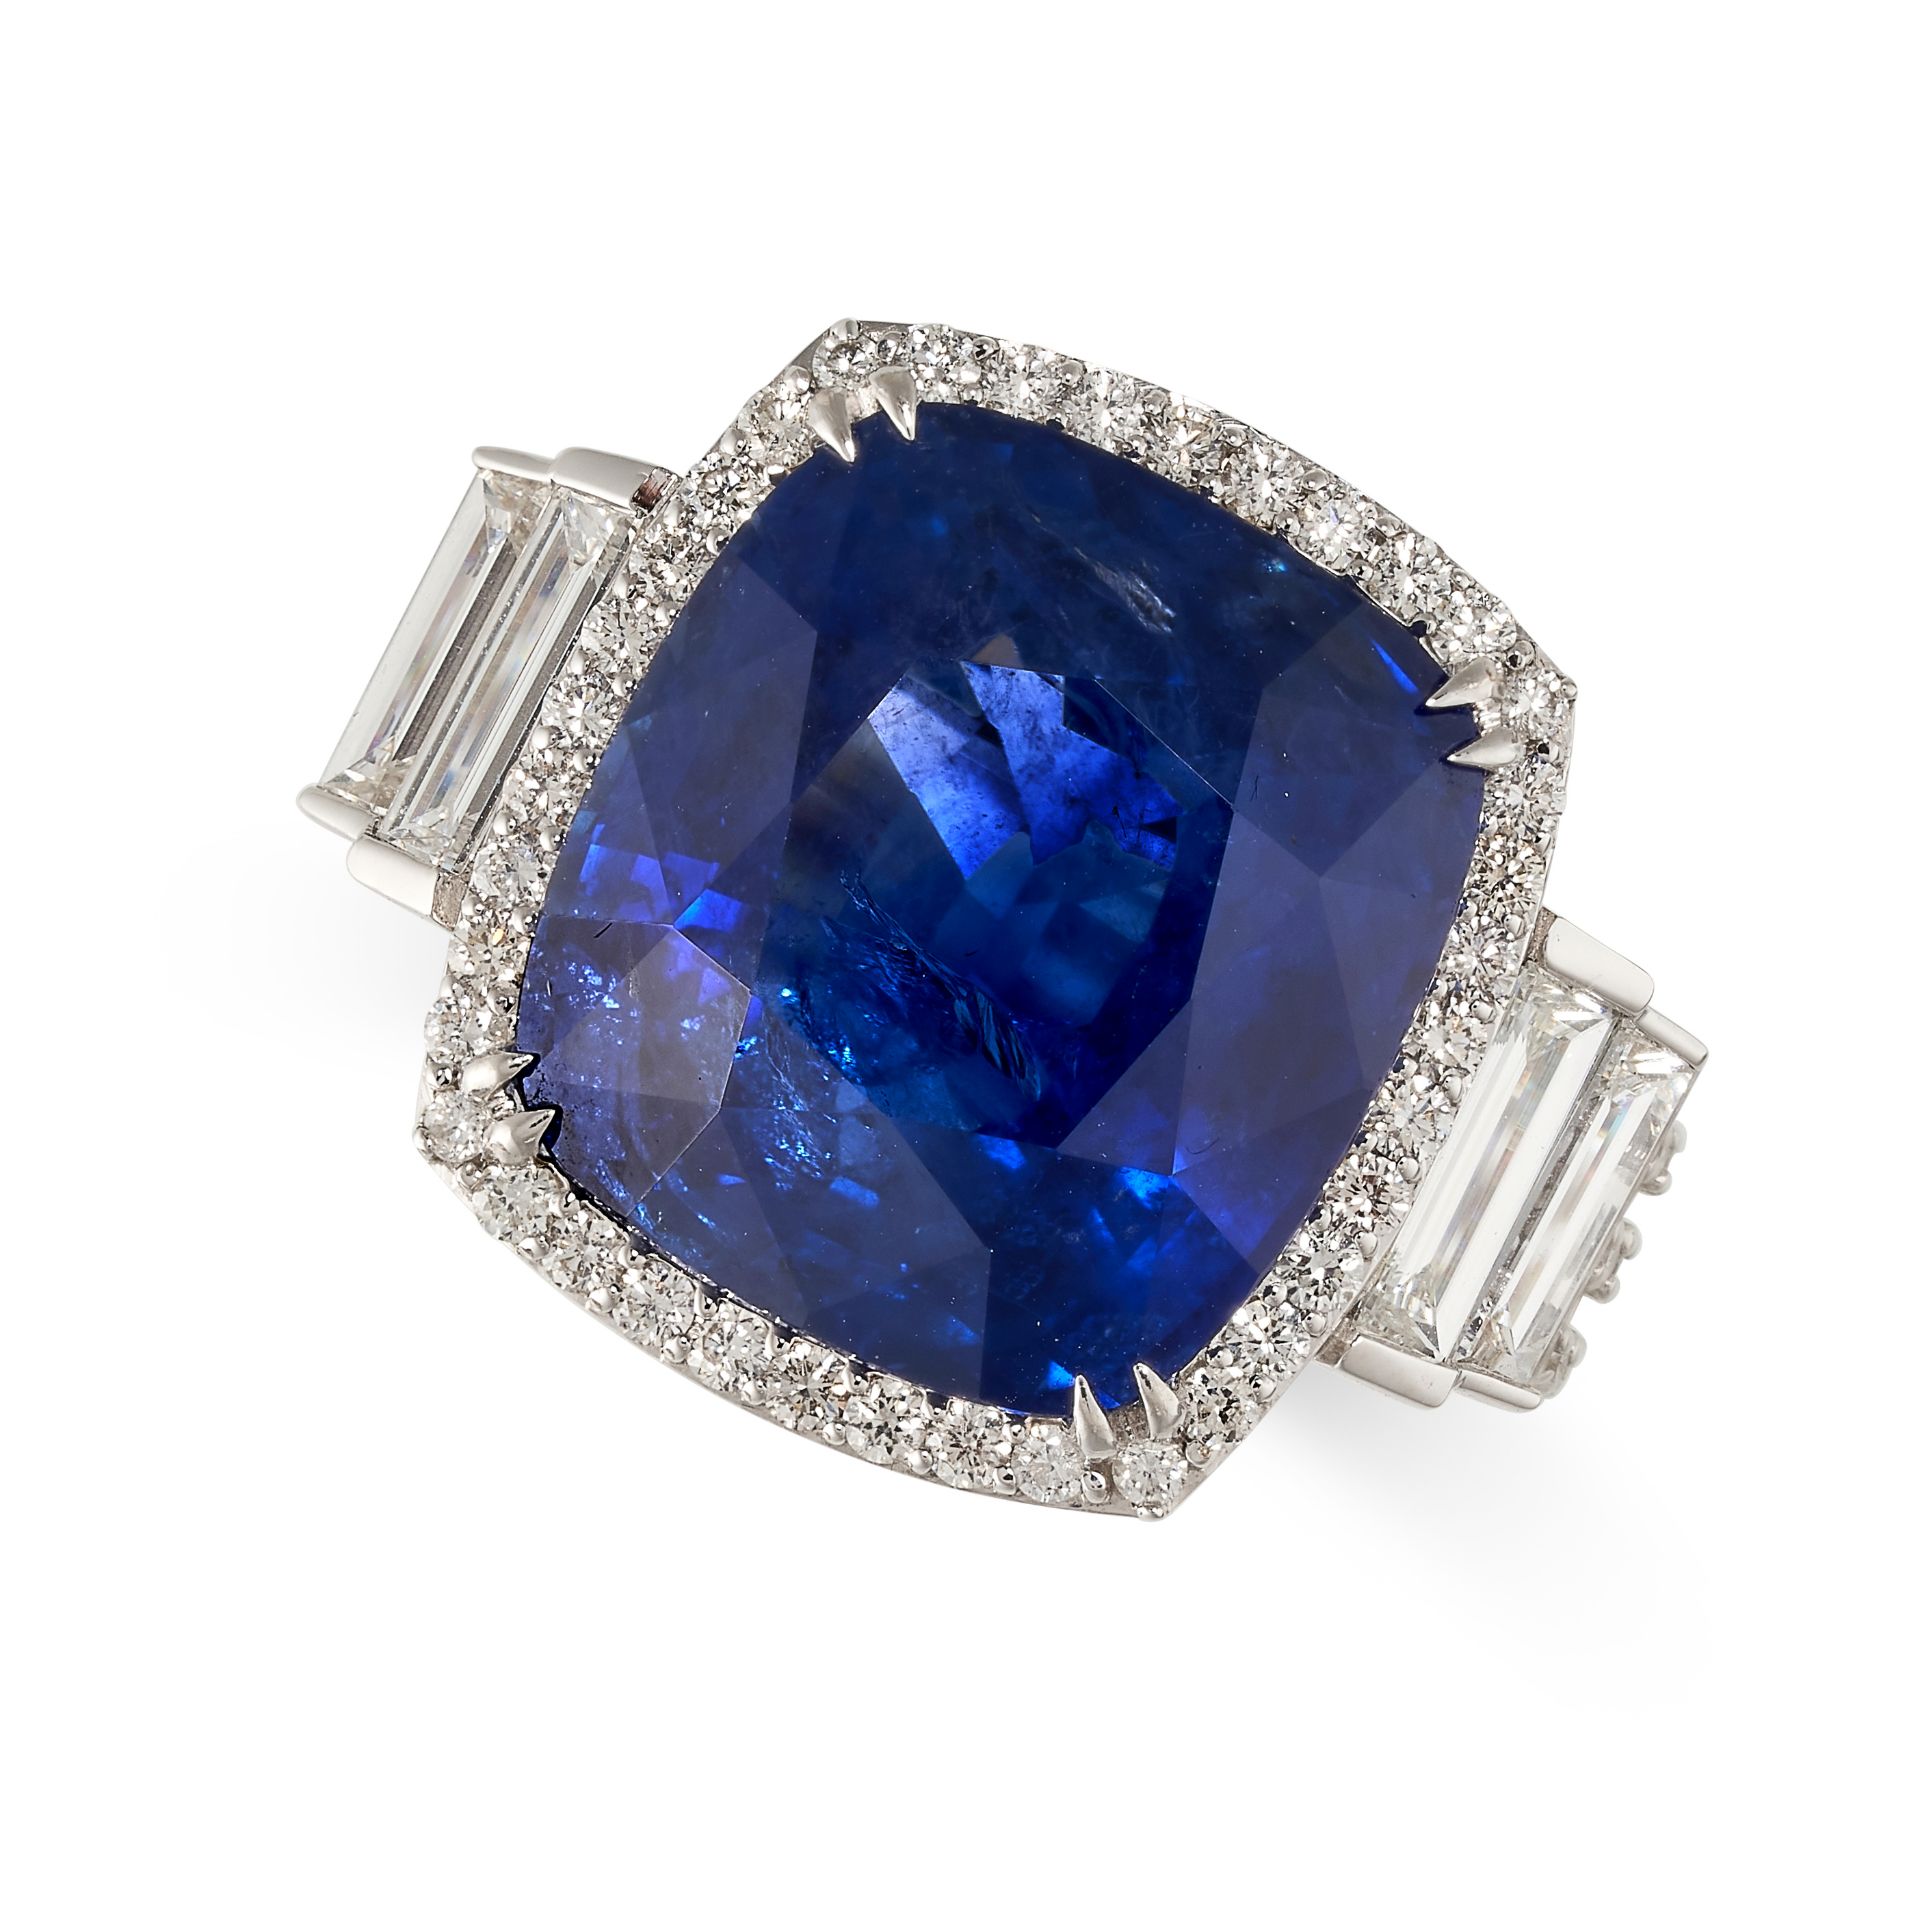 A LARGE SAPPHIRE AND DIAMOND RING in 18ct white gold, set with a cushion cut blue sapphire of 14.